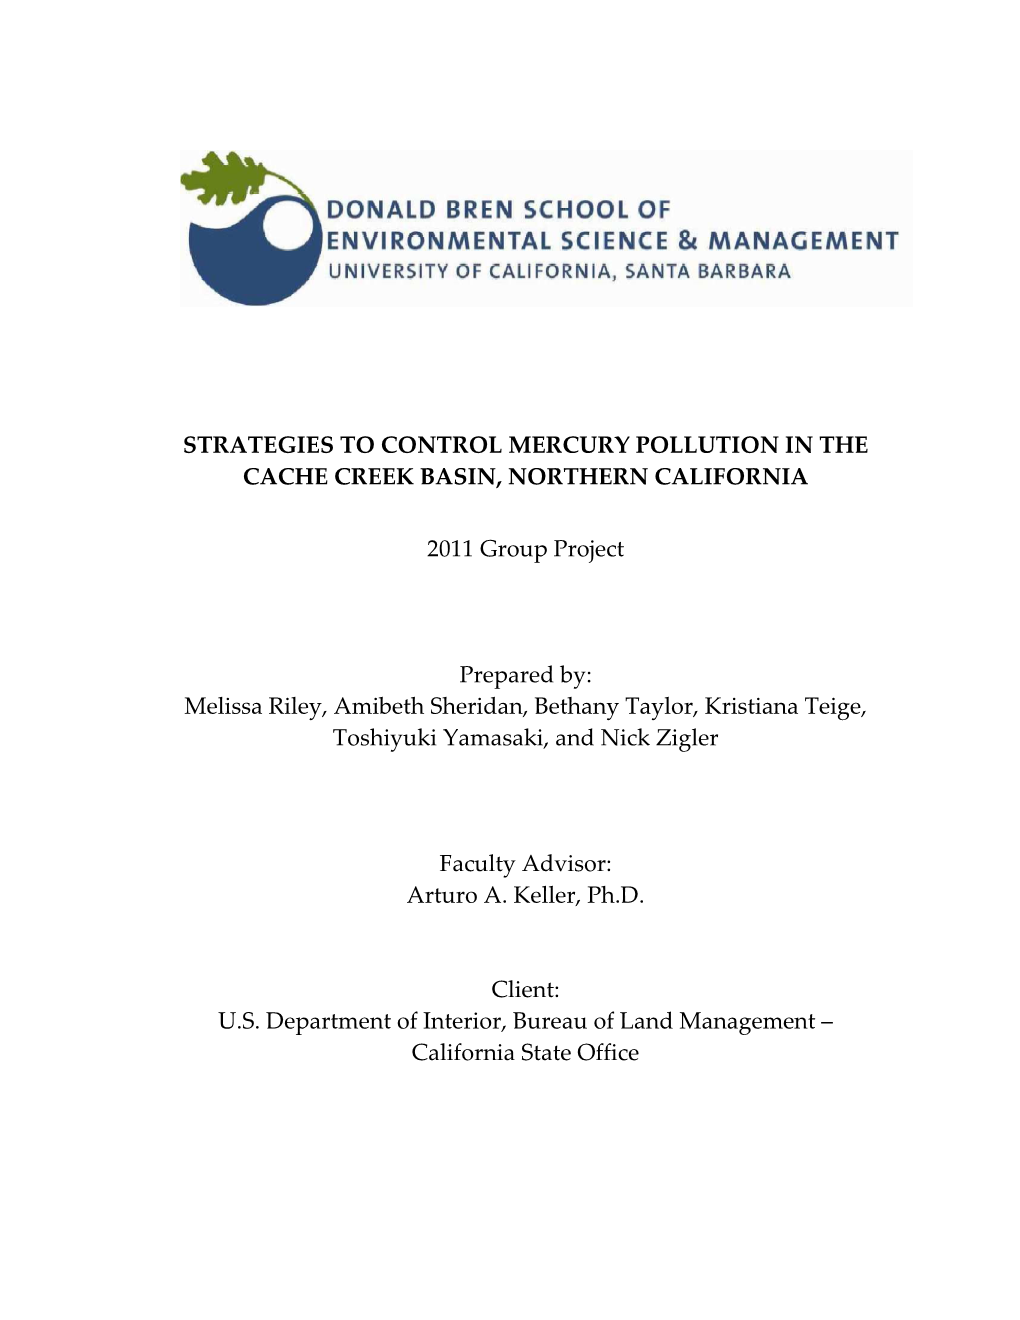 Strategies to Control Mercury Pollution in the Cache Creek Basin, Northern California